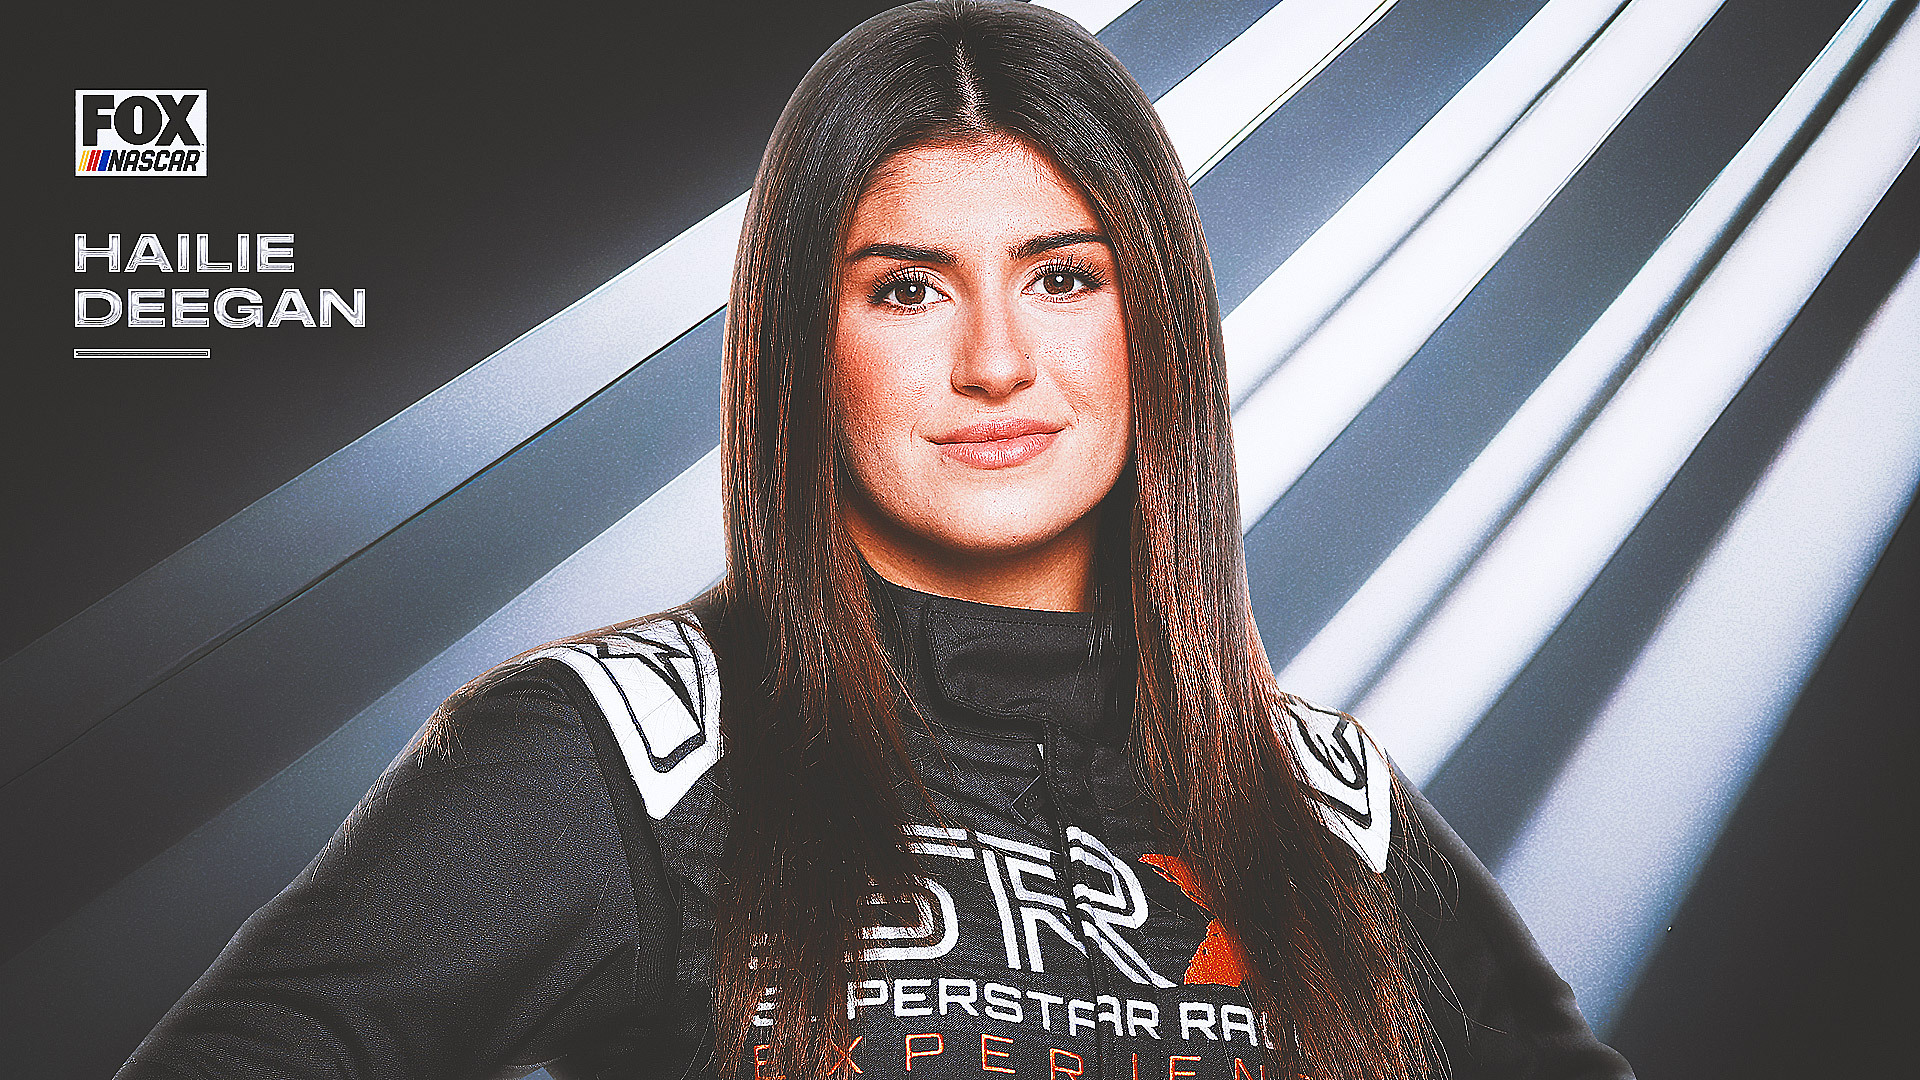 Hailie Deegan will join Xfinity Series in 2024: 'Racing is the only thing I know'